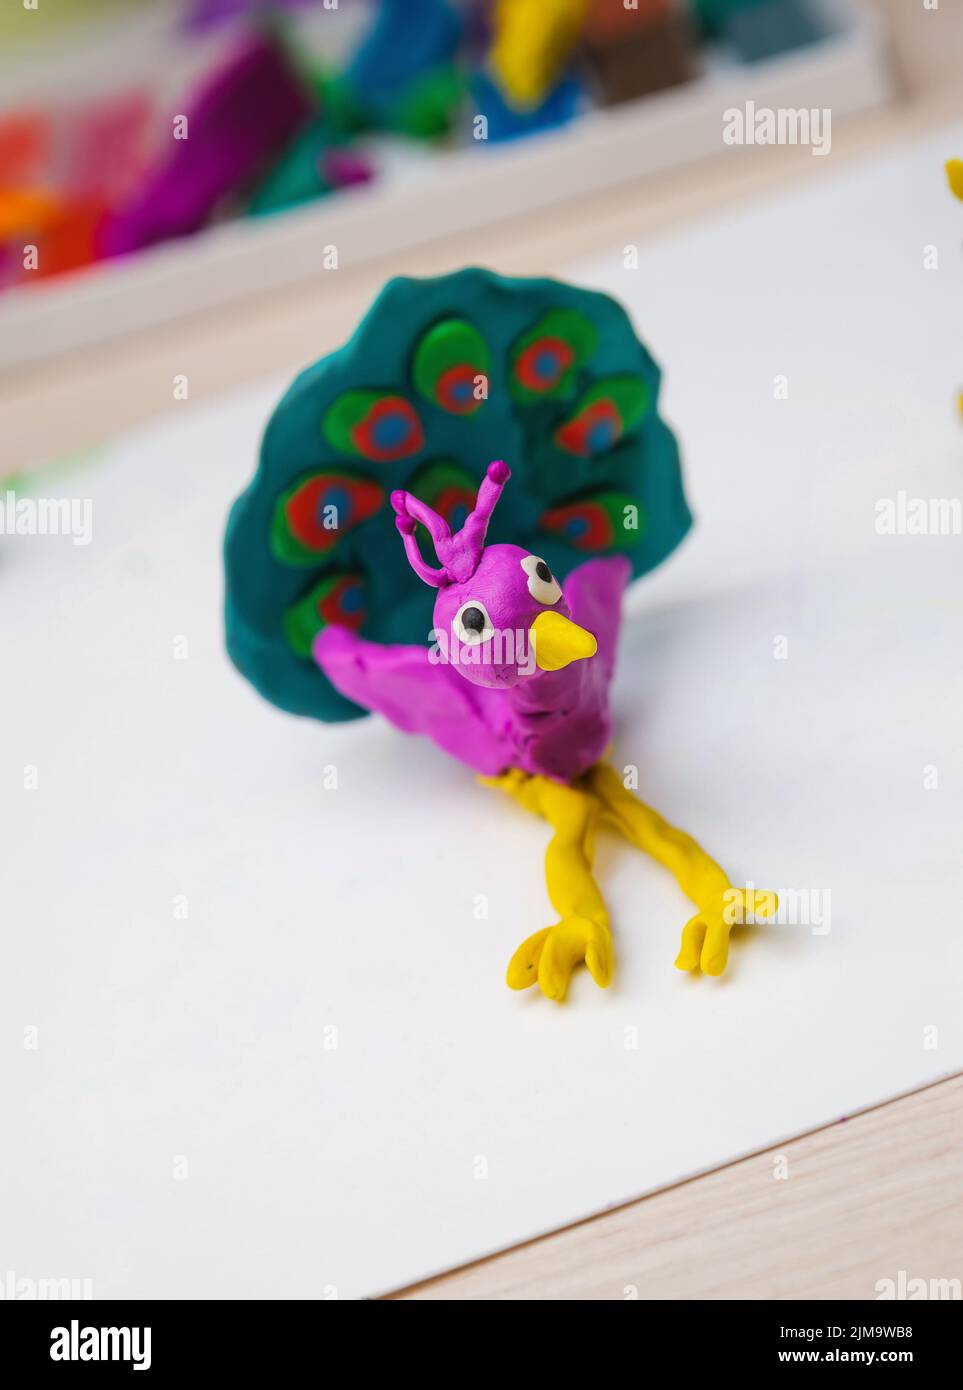 Handmade toy of modelling clay Stock Photo